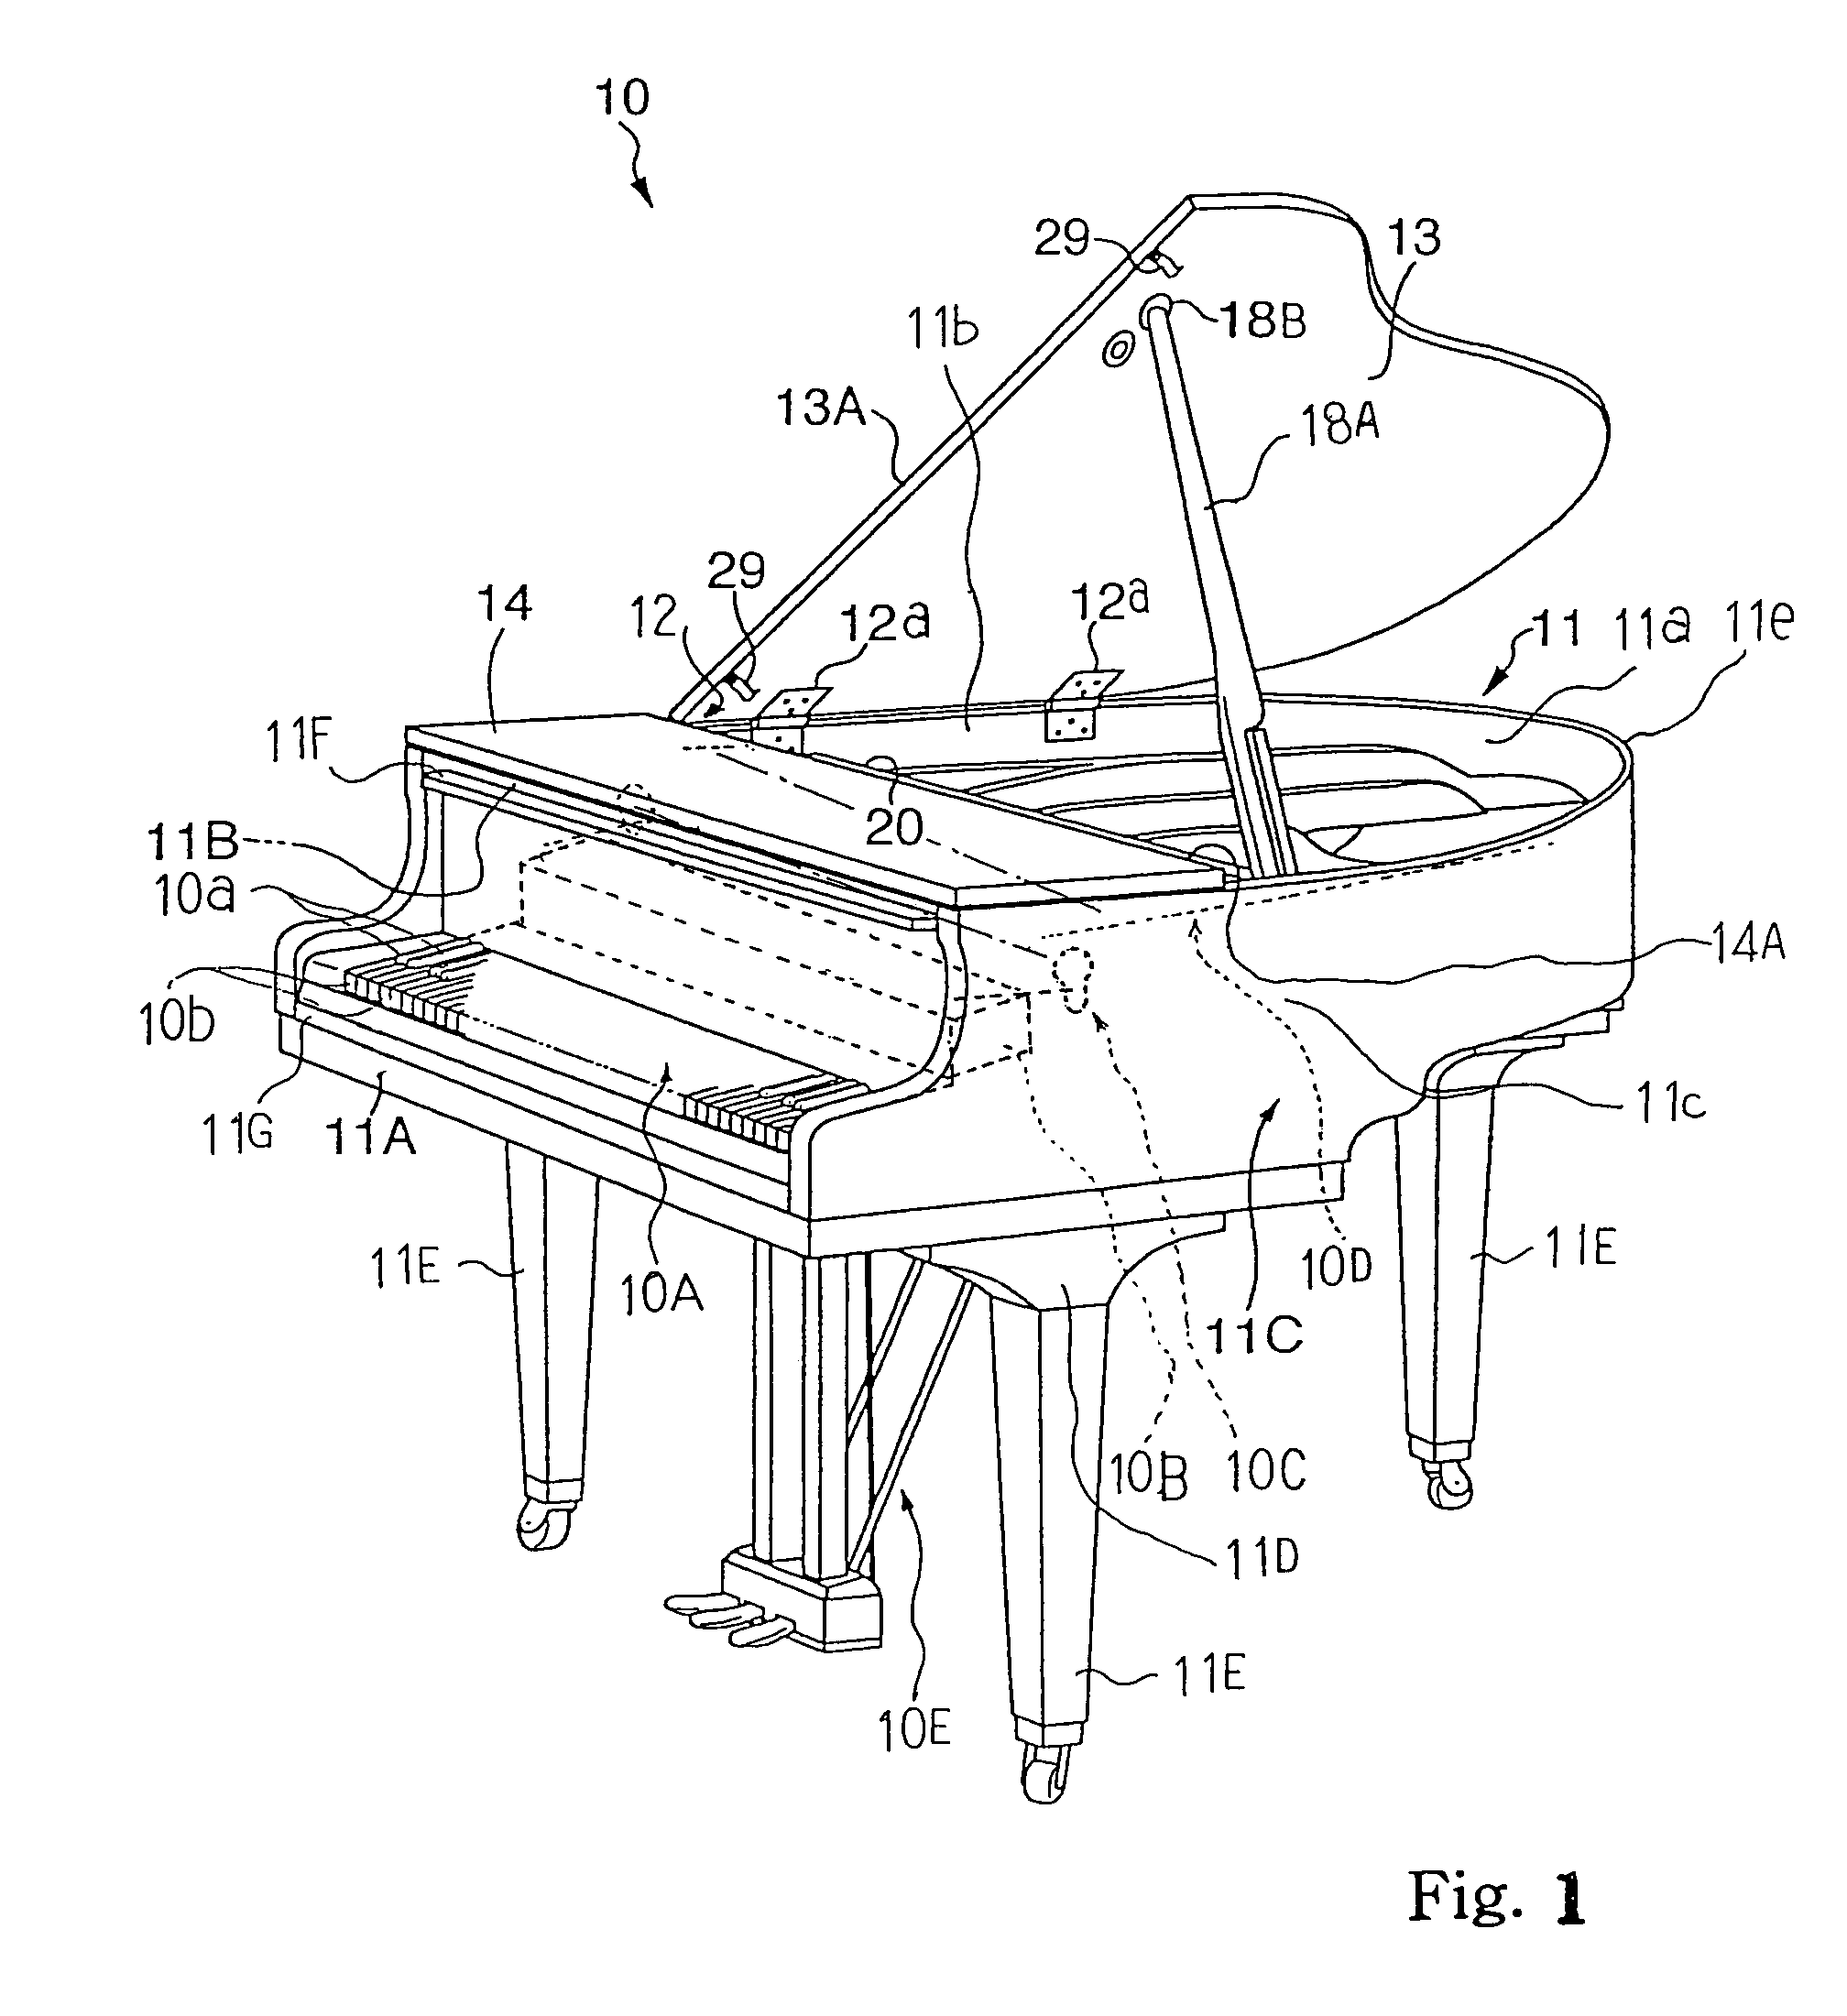 Keyboard musical instrument equipped with automatic top board spacer